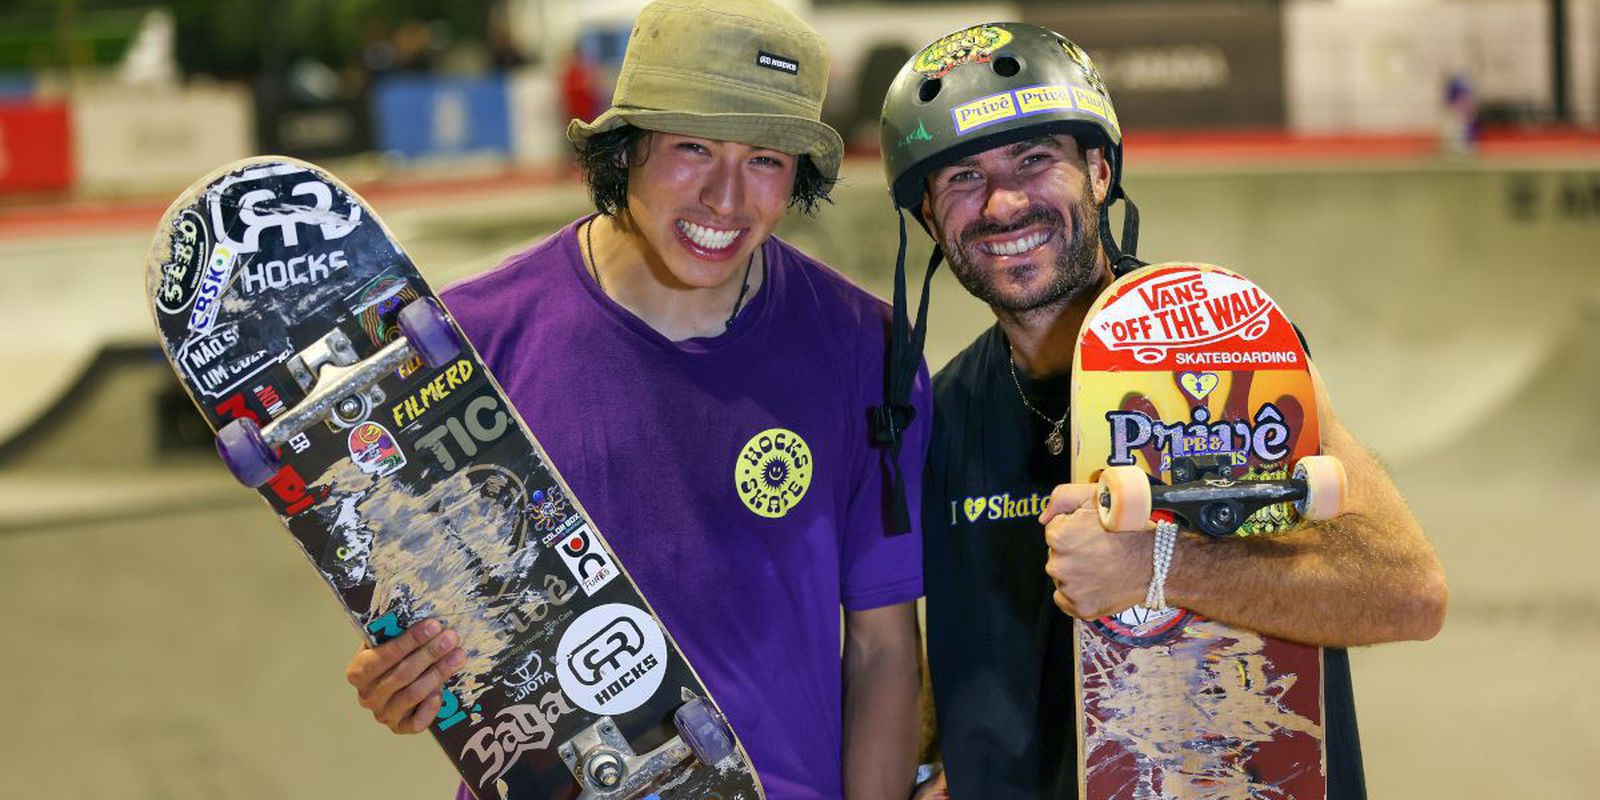 Brazil places two athletes on the podium of the World Skate Park